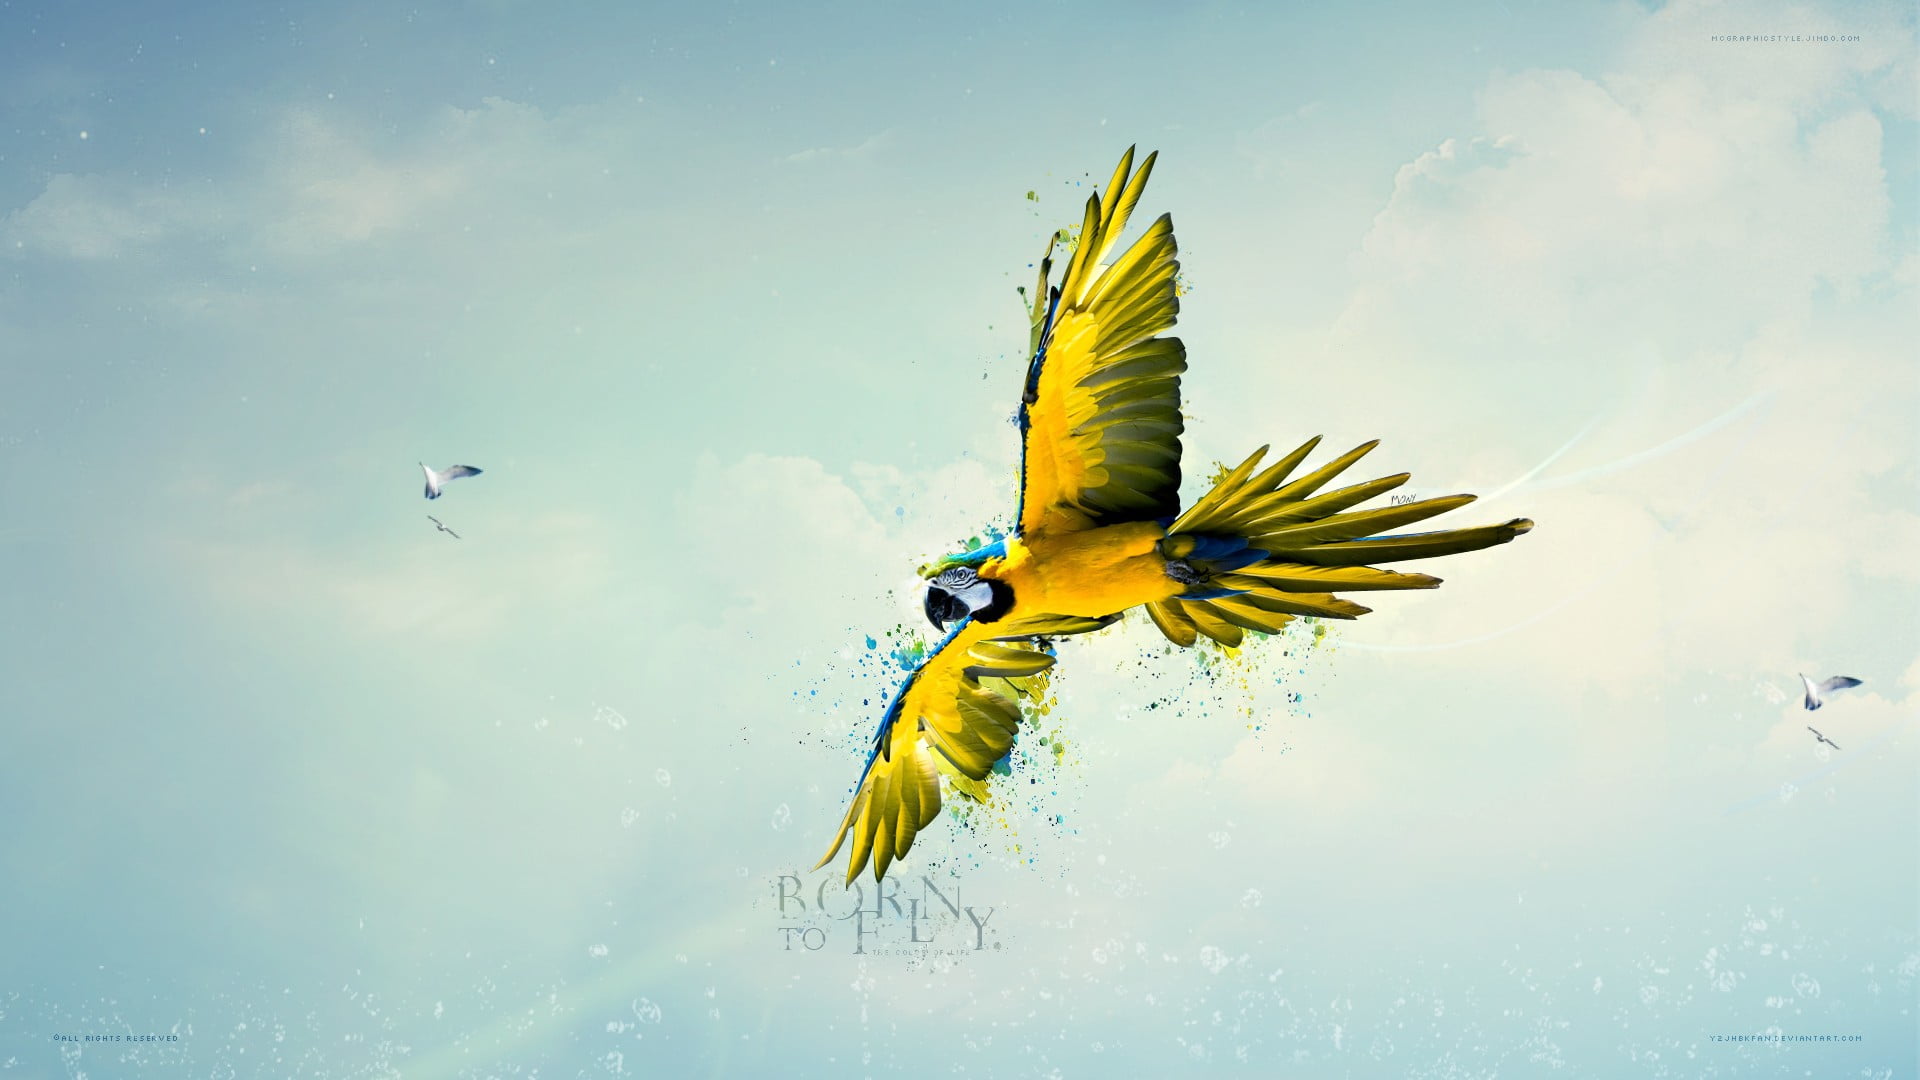 yellow and black macaw, macaws, birds, sky, parrot, flying, paint splatter